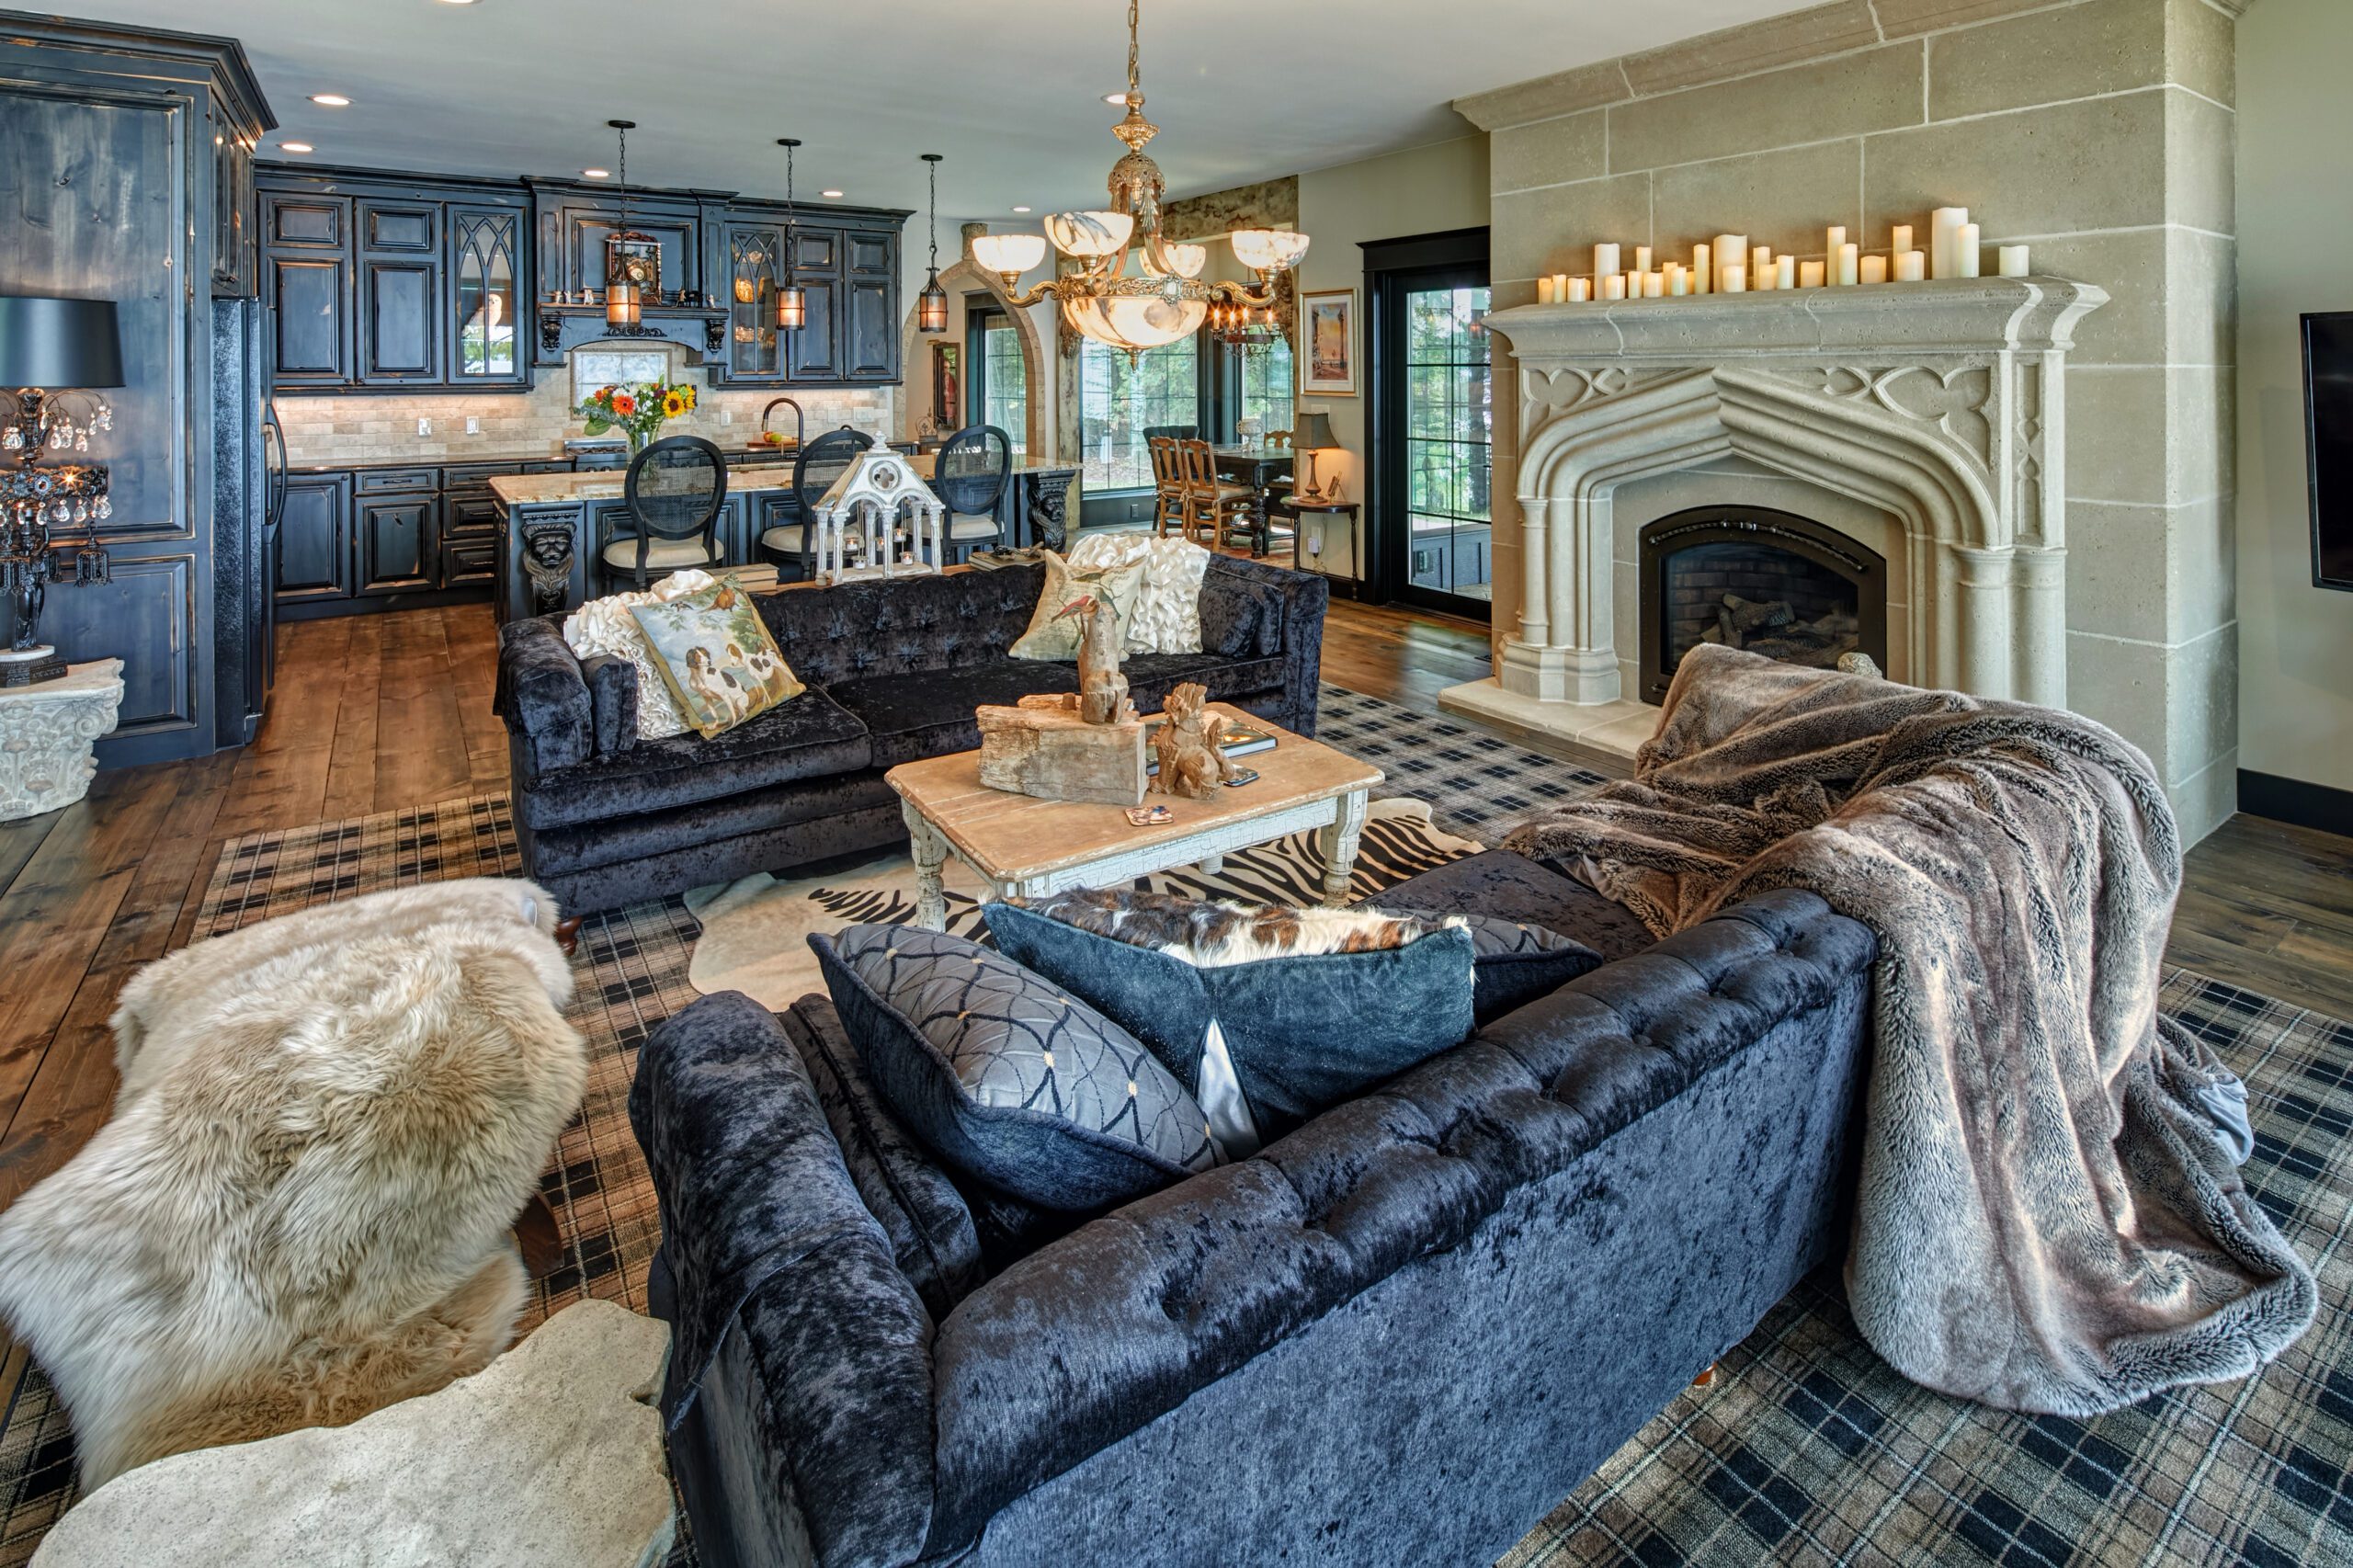 A living room with black furniture, a fireplace, and a mantel.